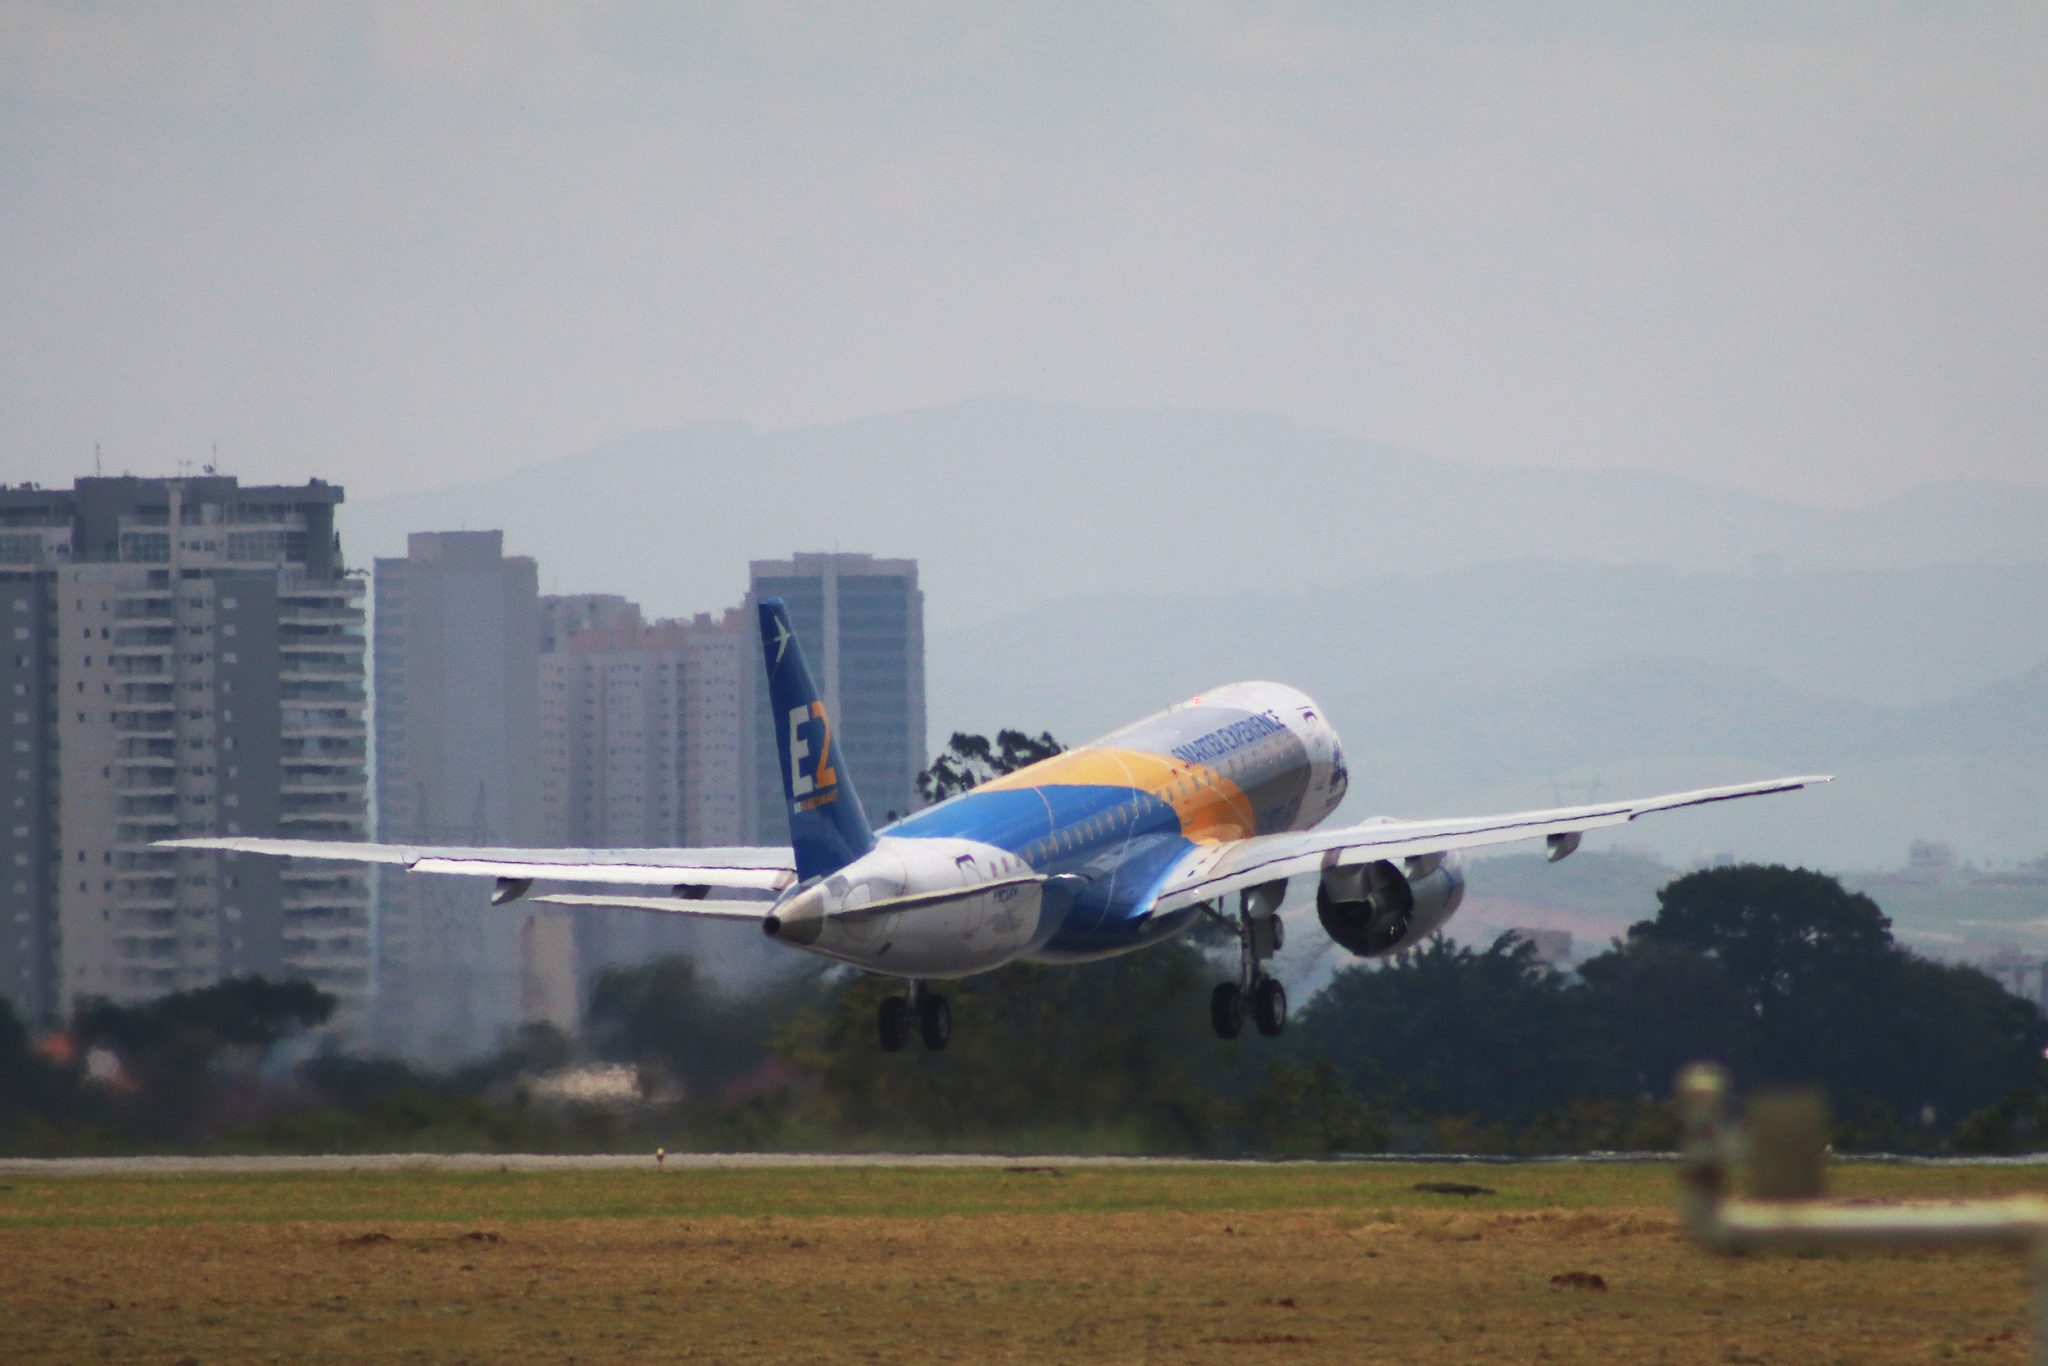 Embraer announces orders and commitments for the E2 family from two undisclosed customers